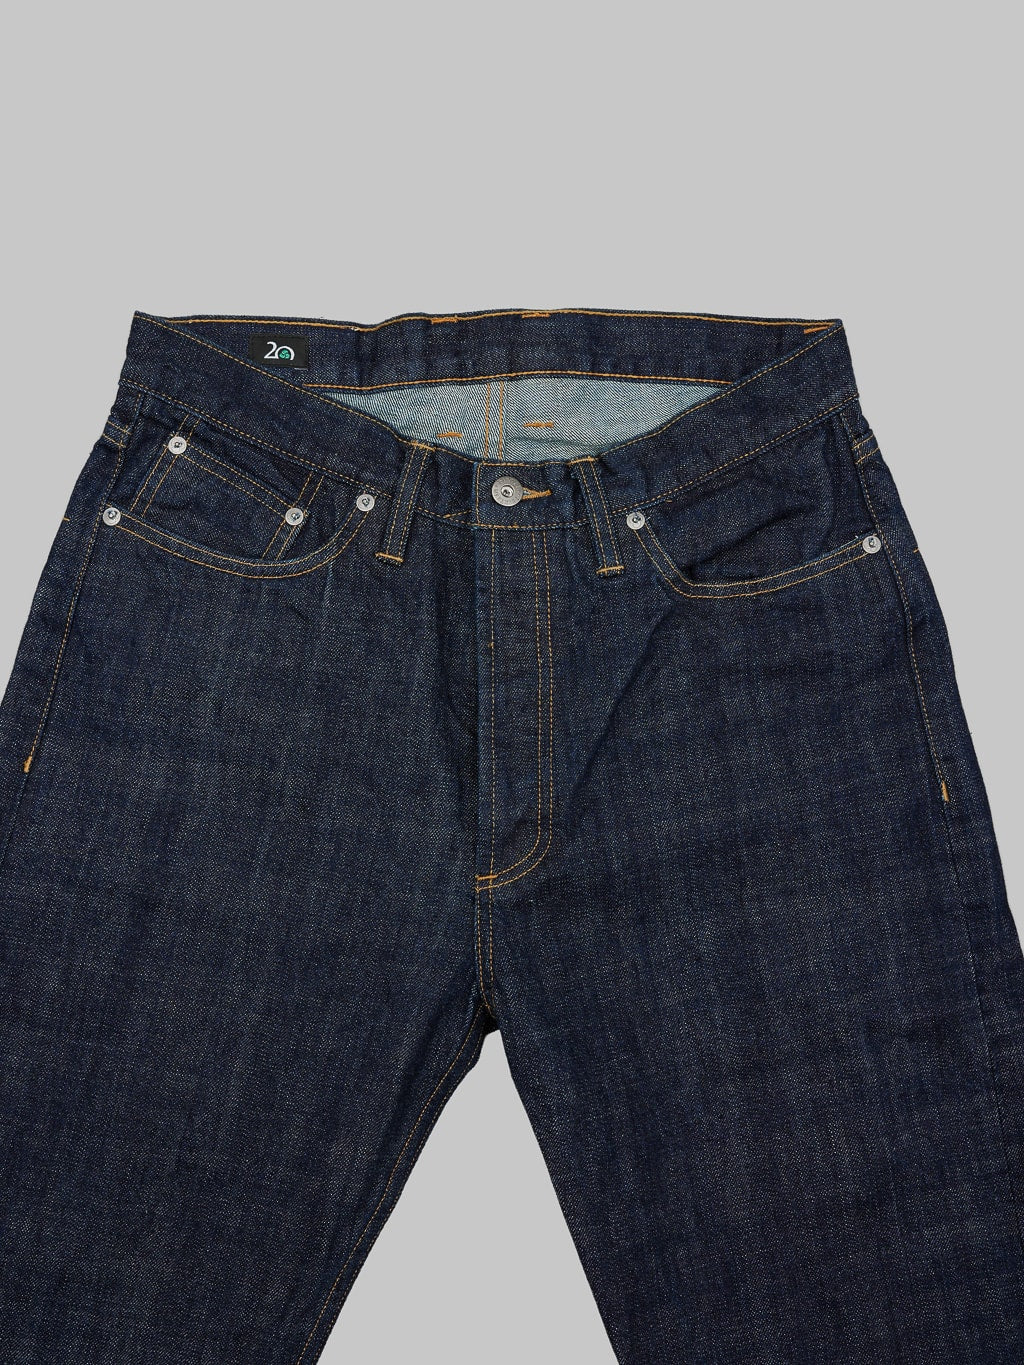 3sixteen CT 20th Anniversary Burkina Faso Classic Tapered Jeans mid high rise